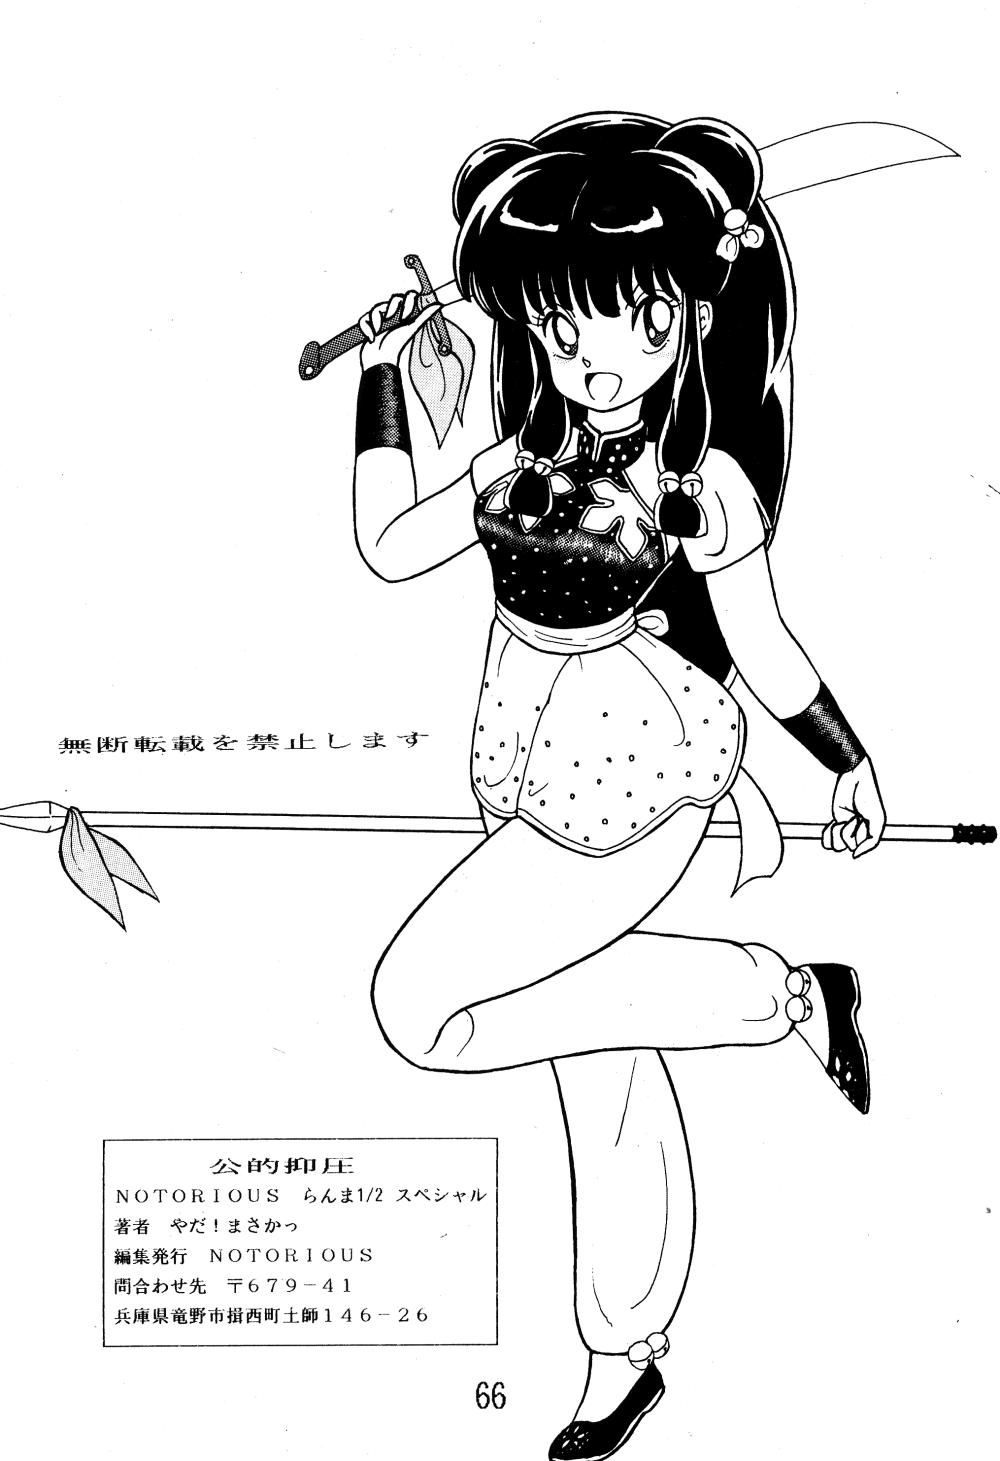 NOTORIOUS Ranma 1/2 Special 64